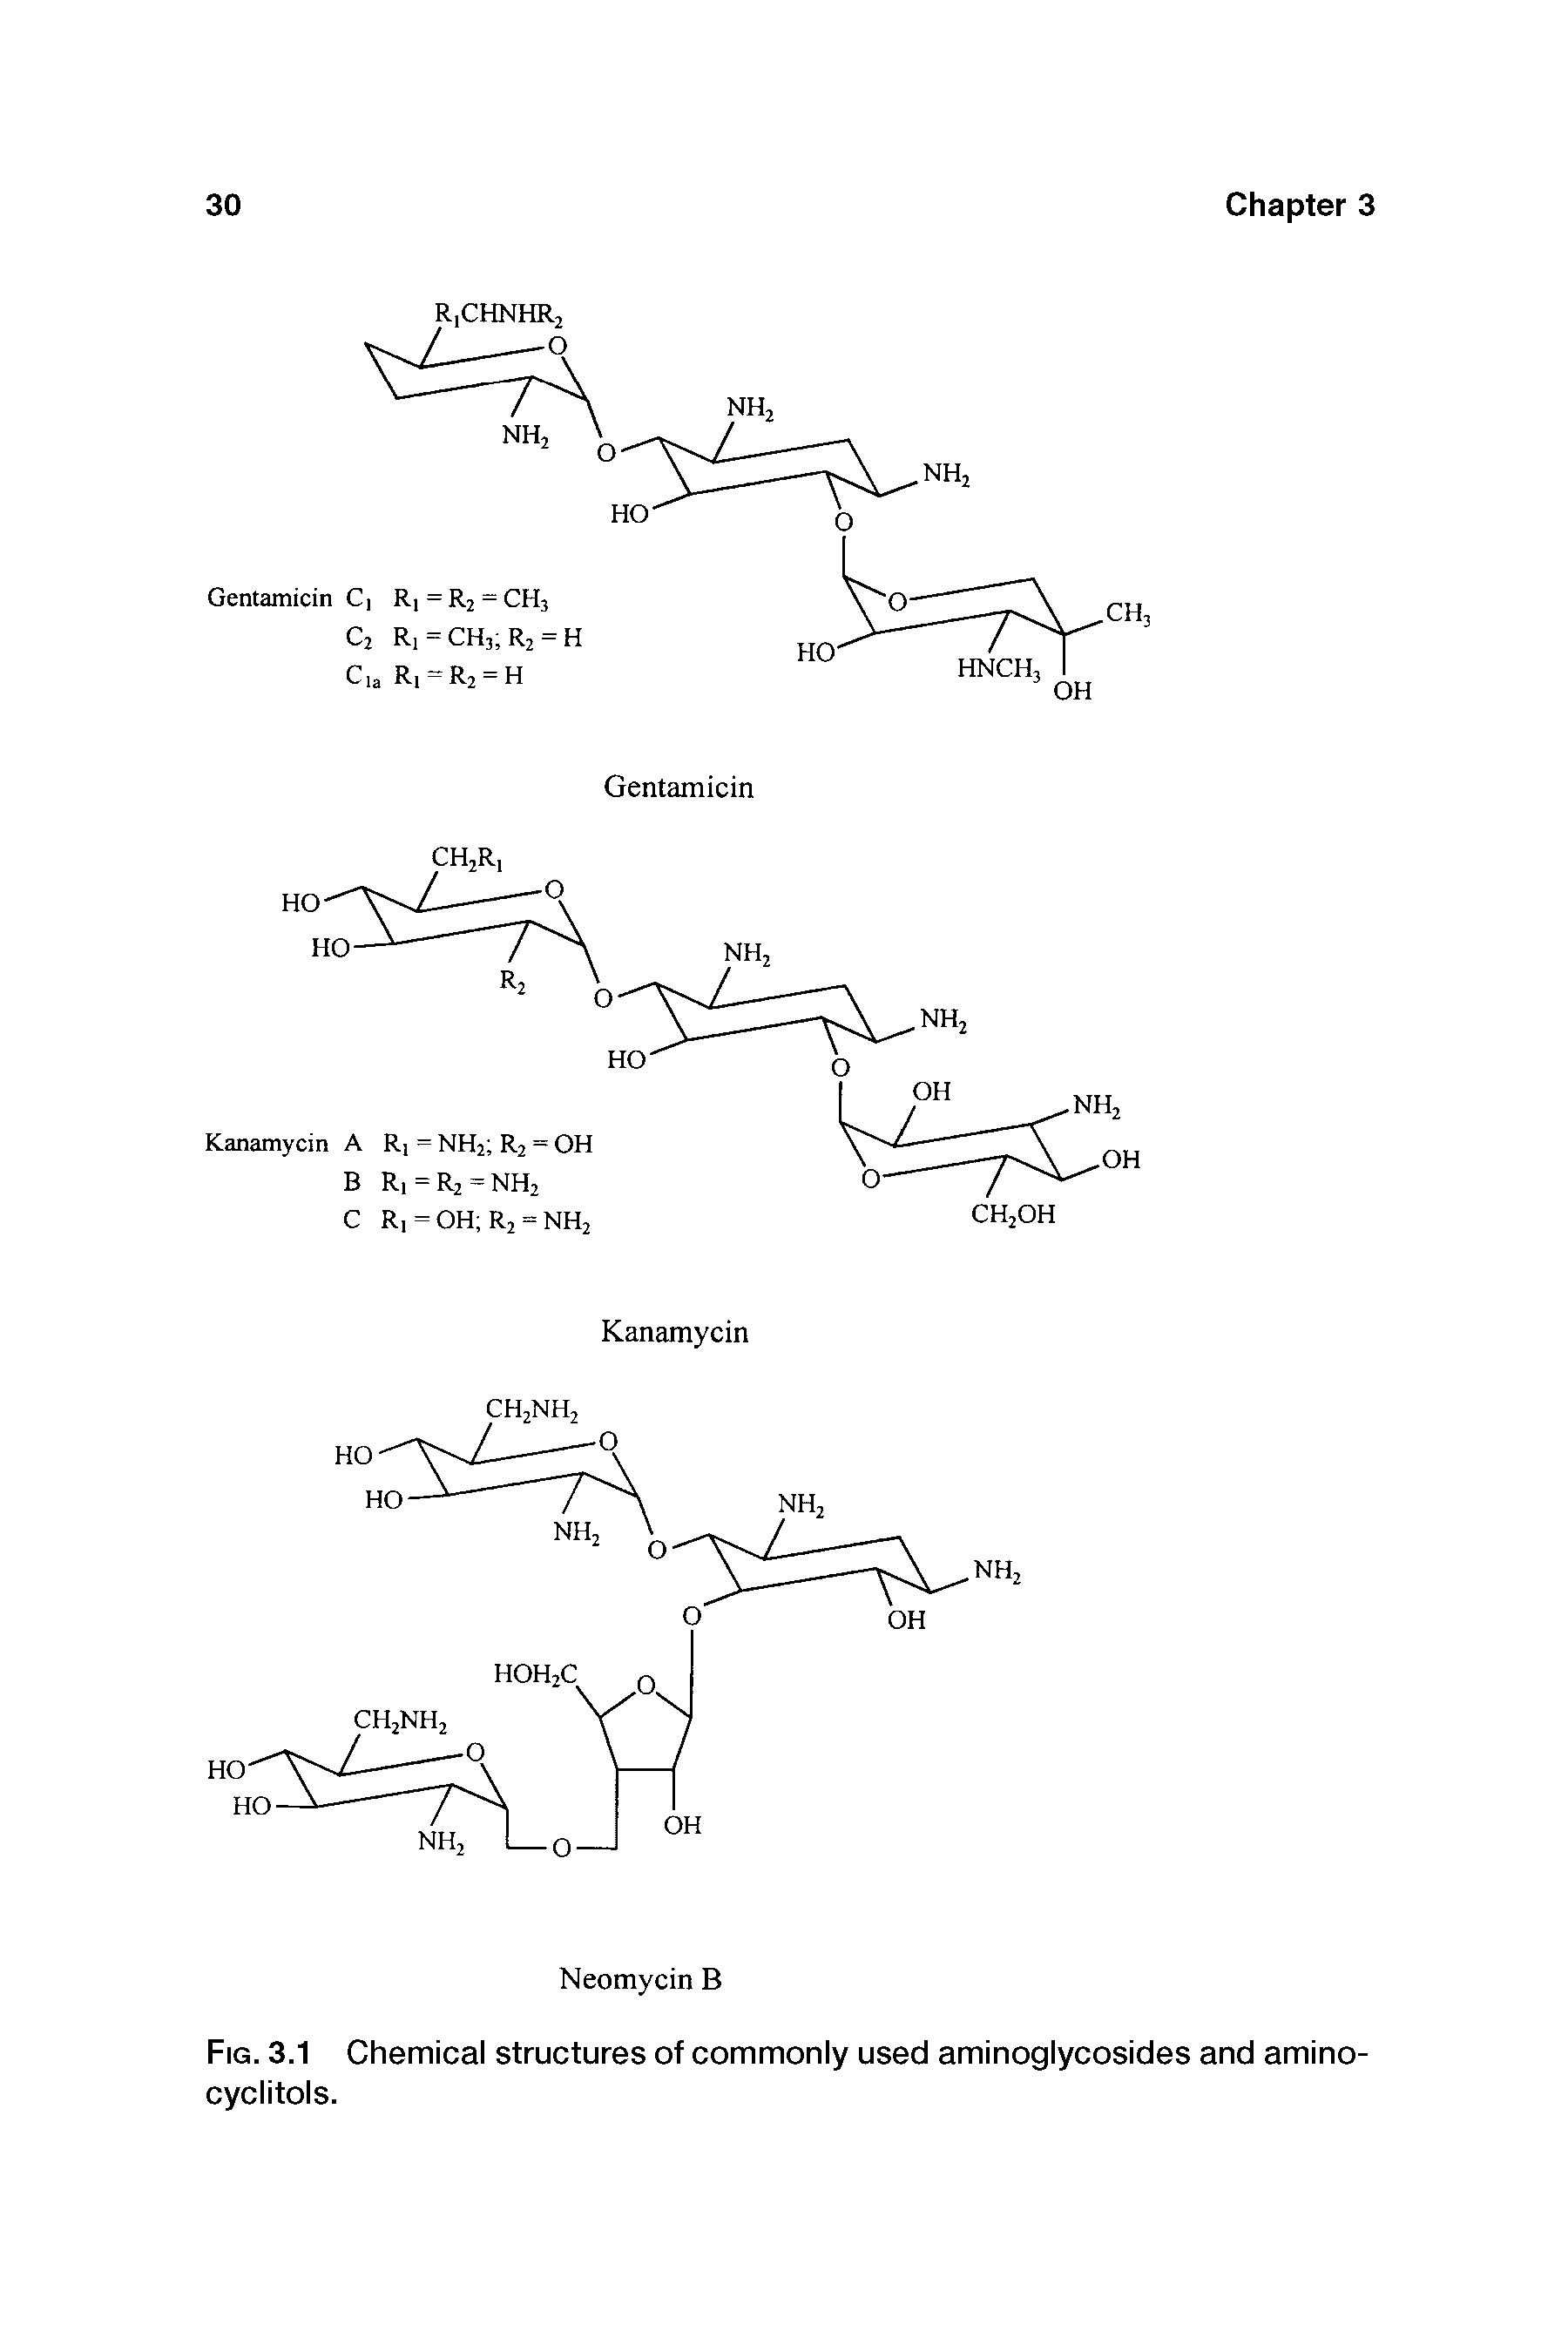 Fig. 3.1 Chemical structures of commonly used aminoglycosides and aminocyclitols.